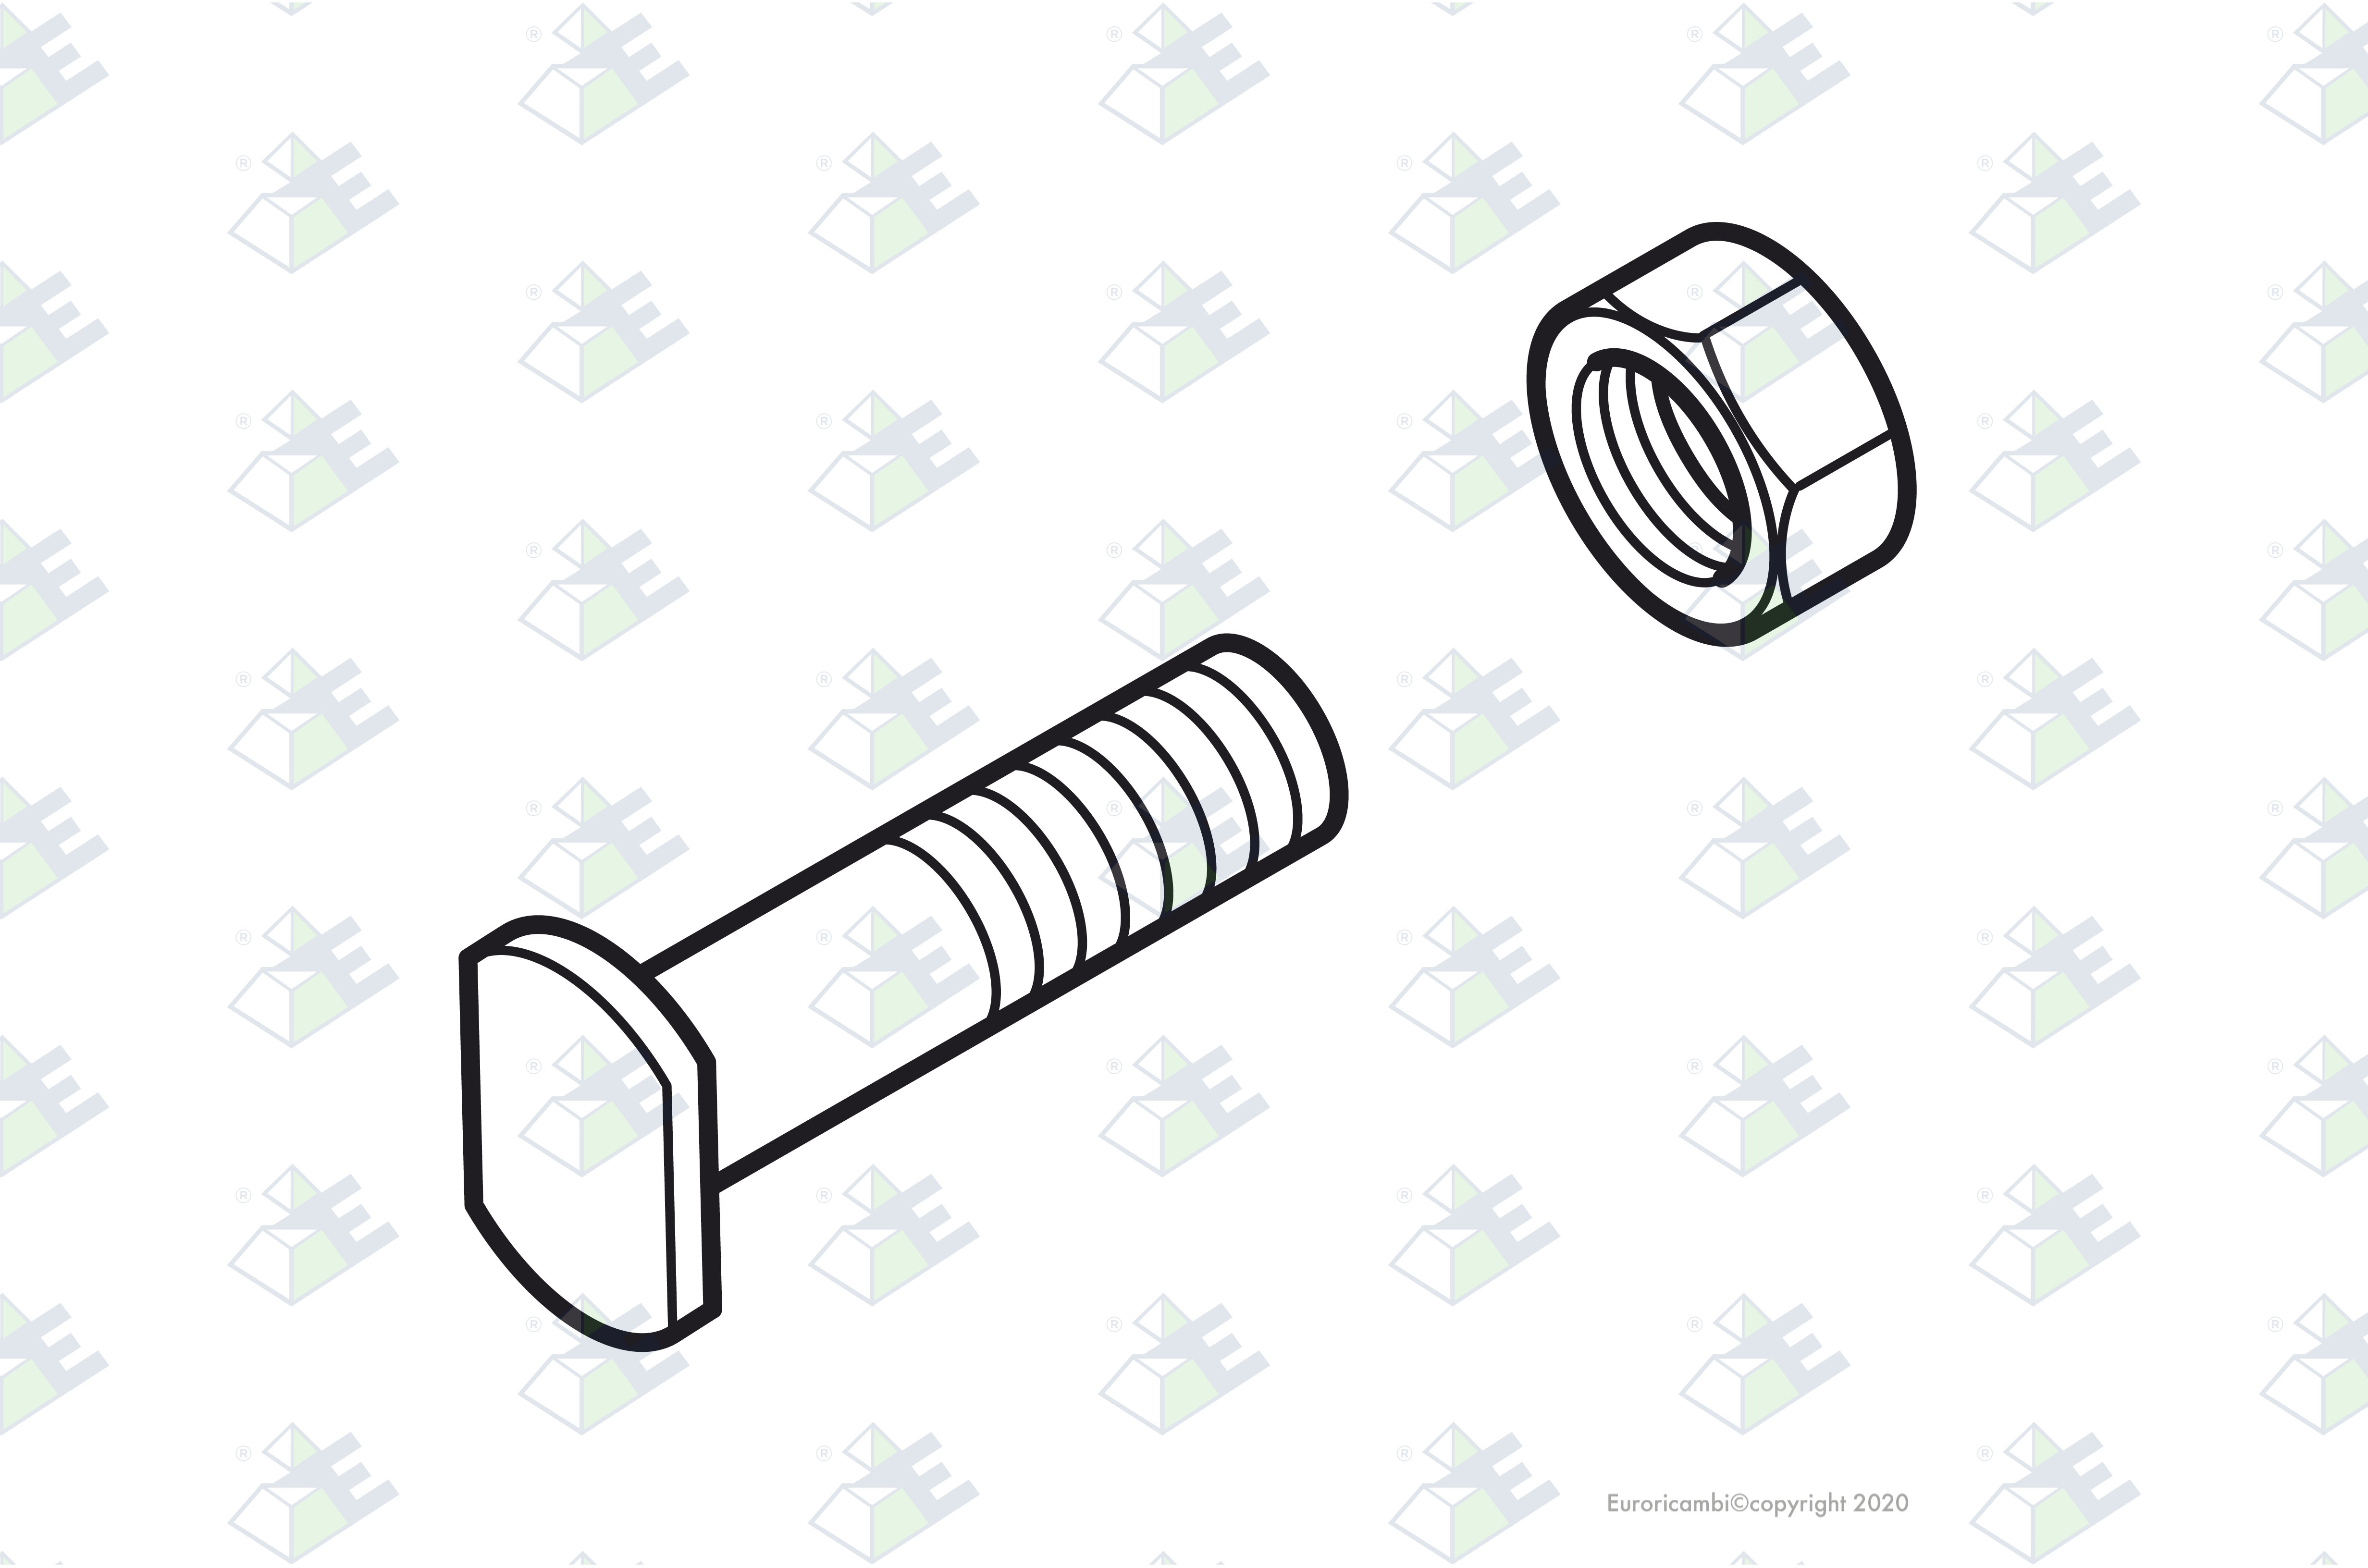 NUTS+SCREWS KIT 18X60X1,5 suitable to S C A N I A 74170515